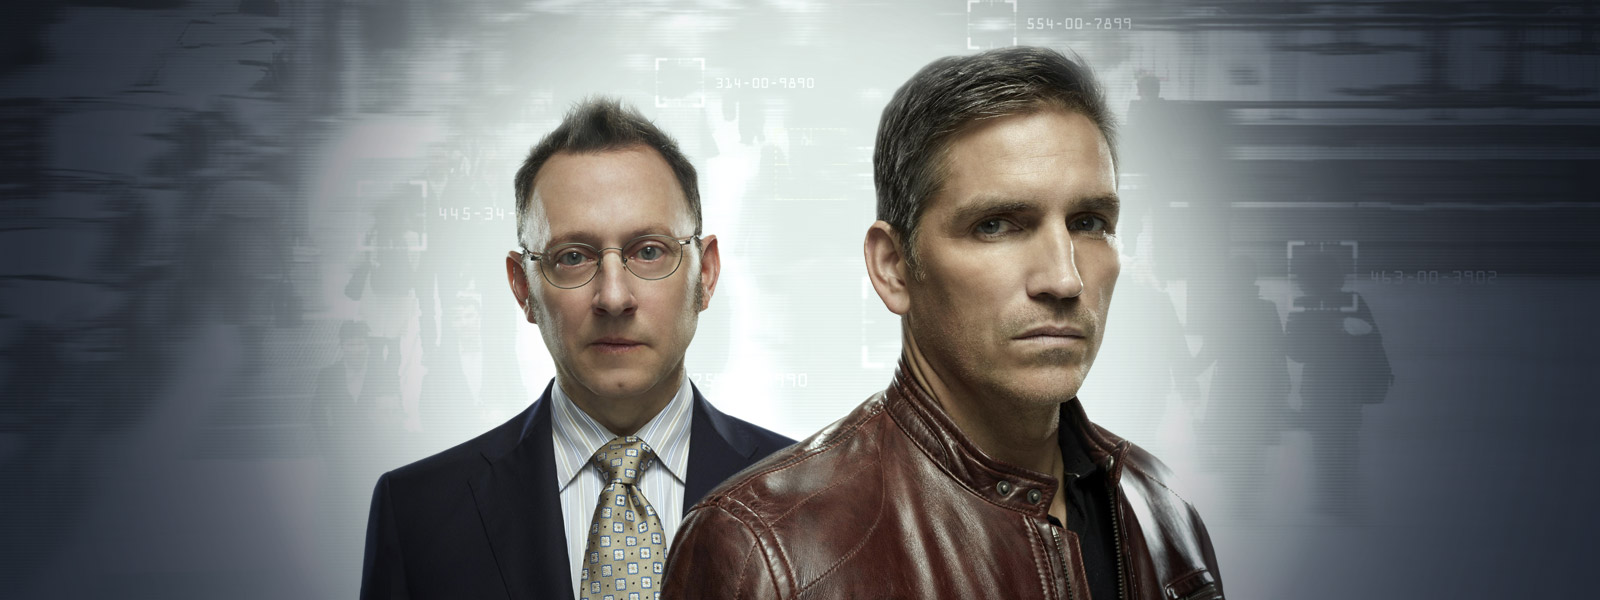 Review: Person of Interest 3.16- “RAM”